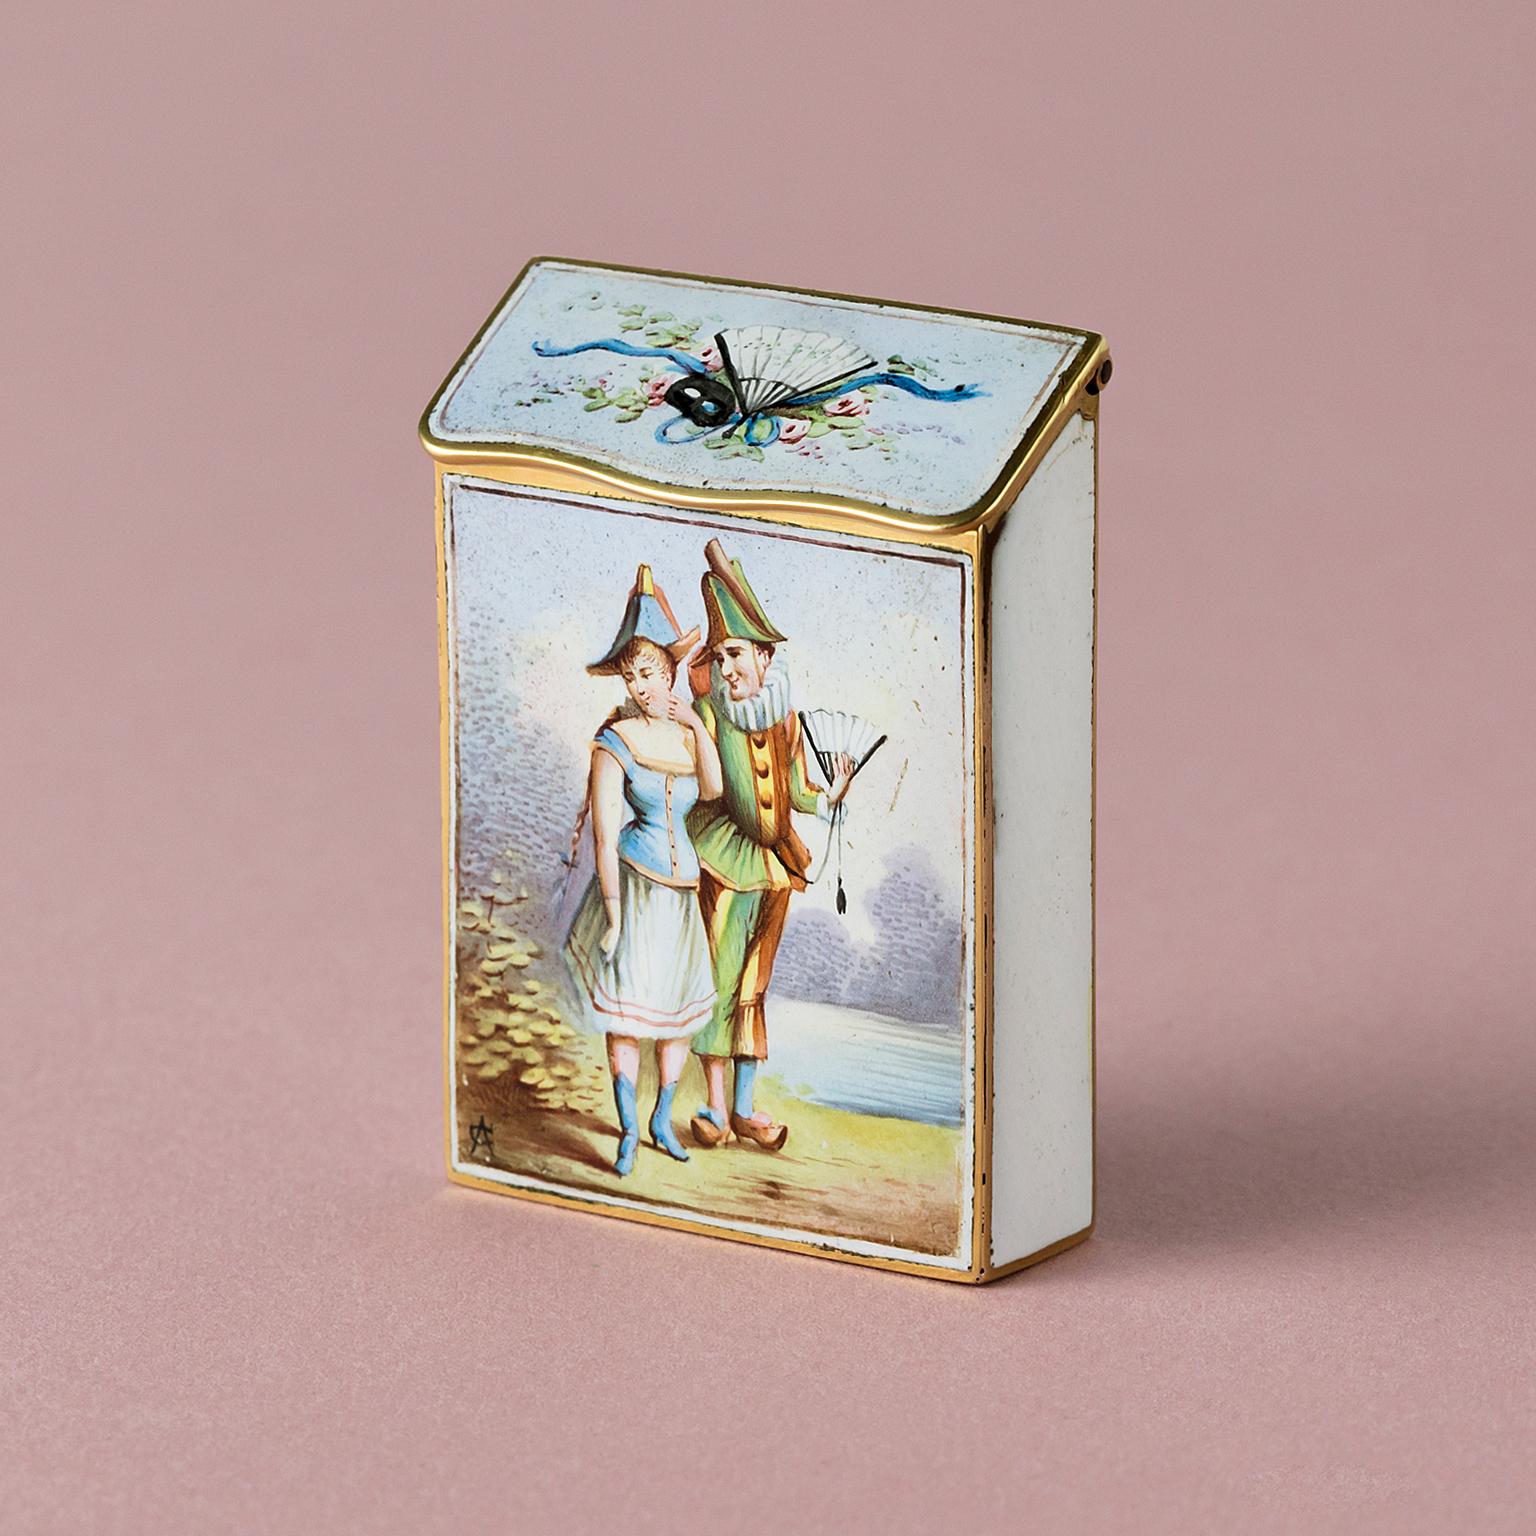 An attractive 19th century gold box with an enamel decor of the commedia dell’arte figures Harlequin and Columbina.

weight: 35.5 grams
height: 5 cm